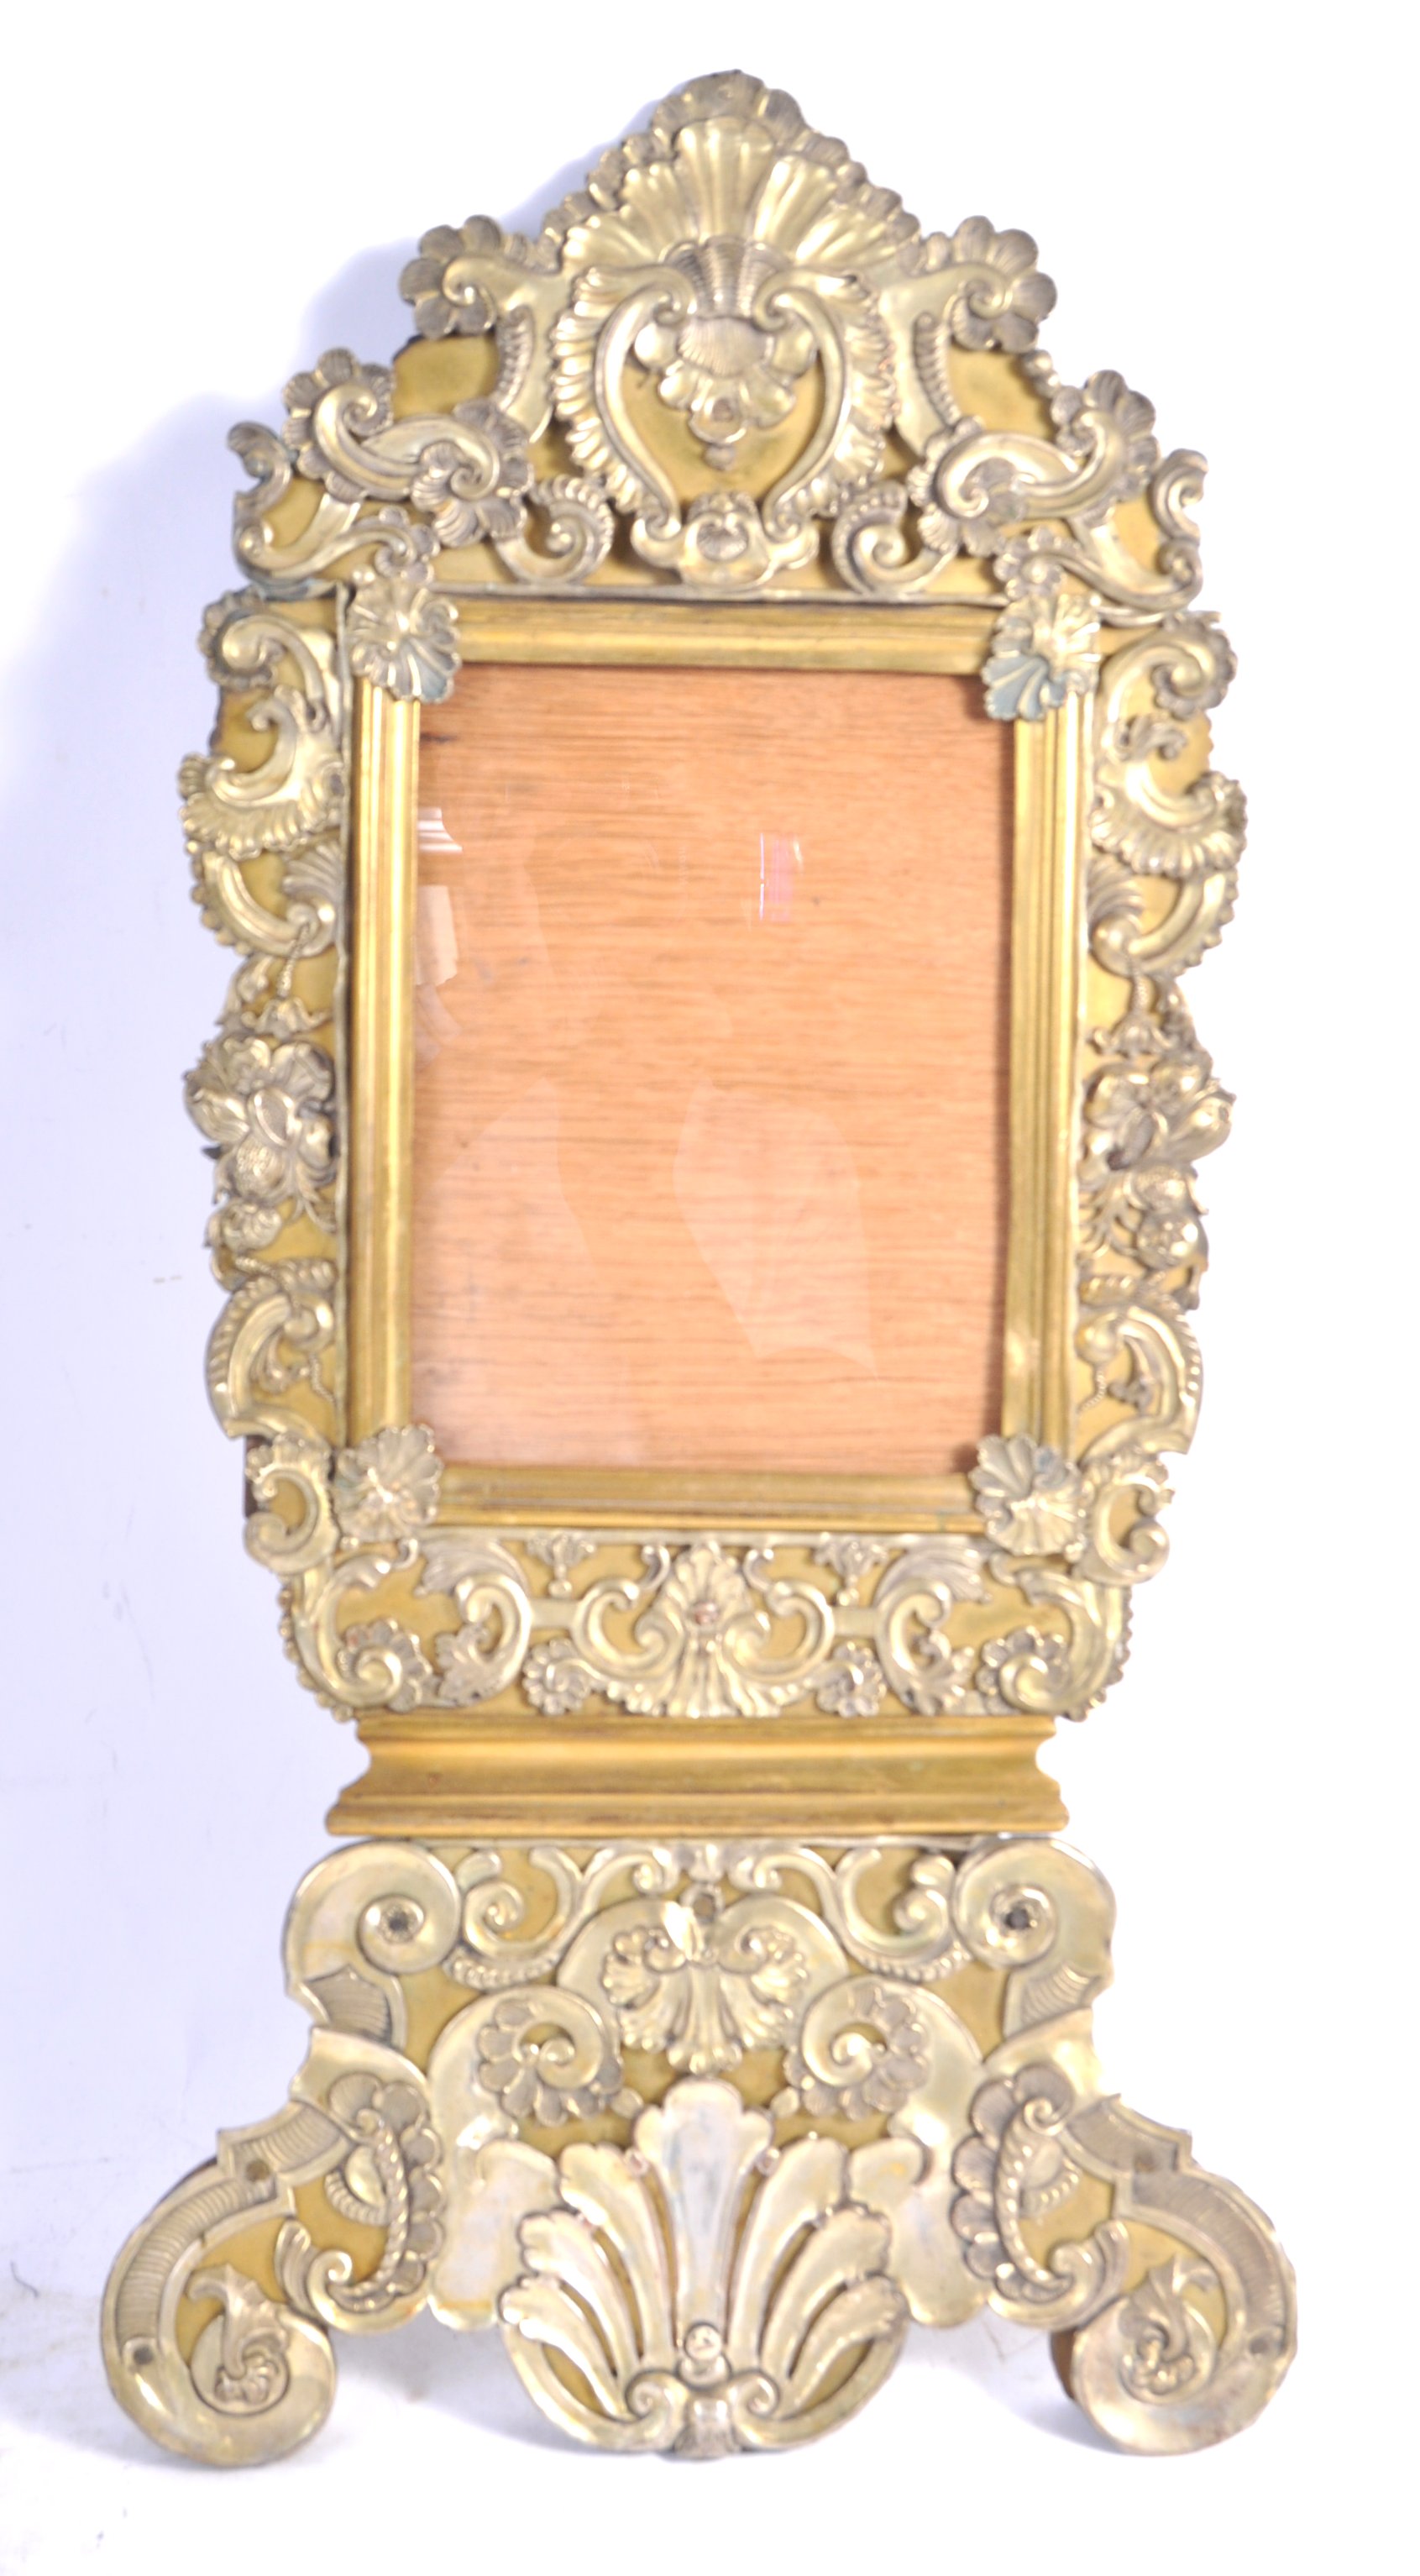 PAIR OF 18TH CENTURY ANTIQUE REPOUSSE BRASS PICTURE FRAMES - Image 2 of 7